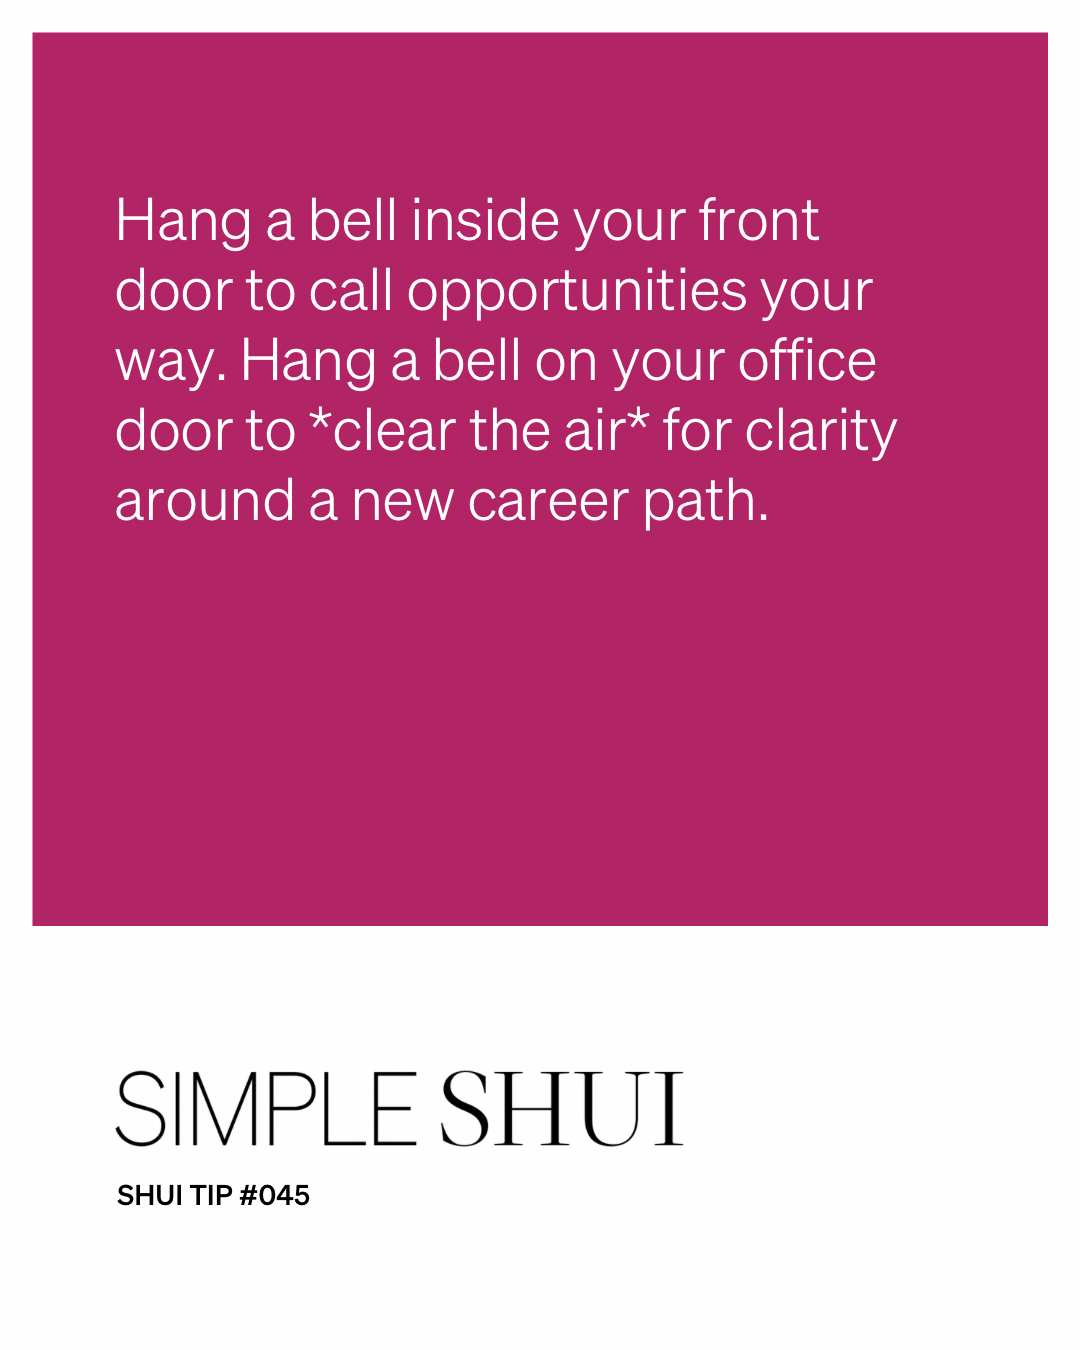 simple shui tip: ring new opportunities your way!